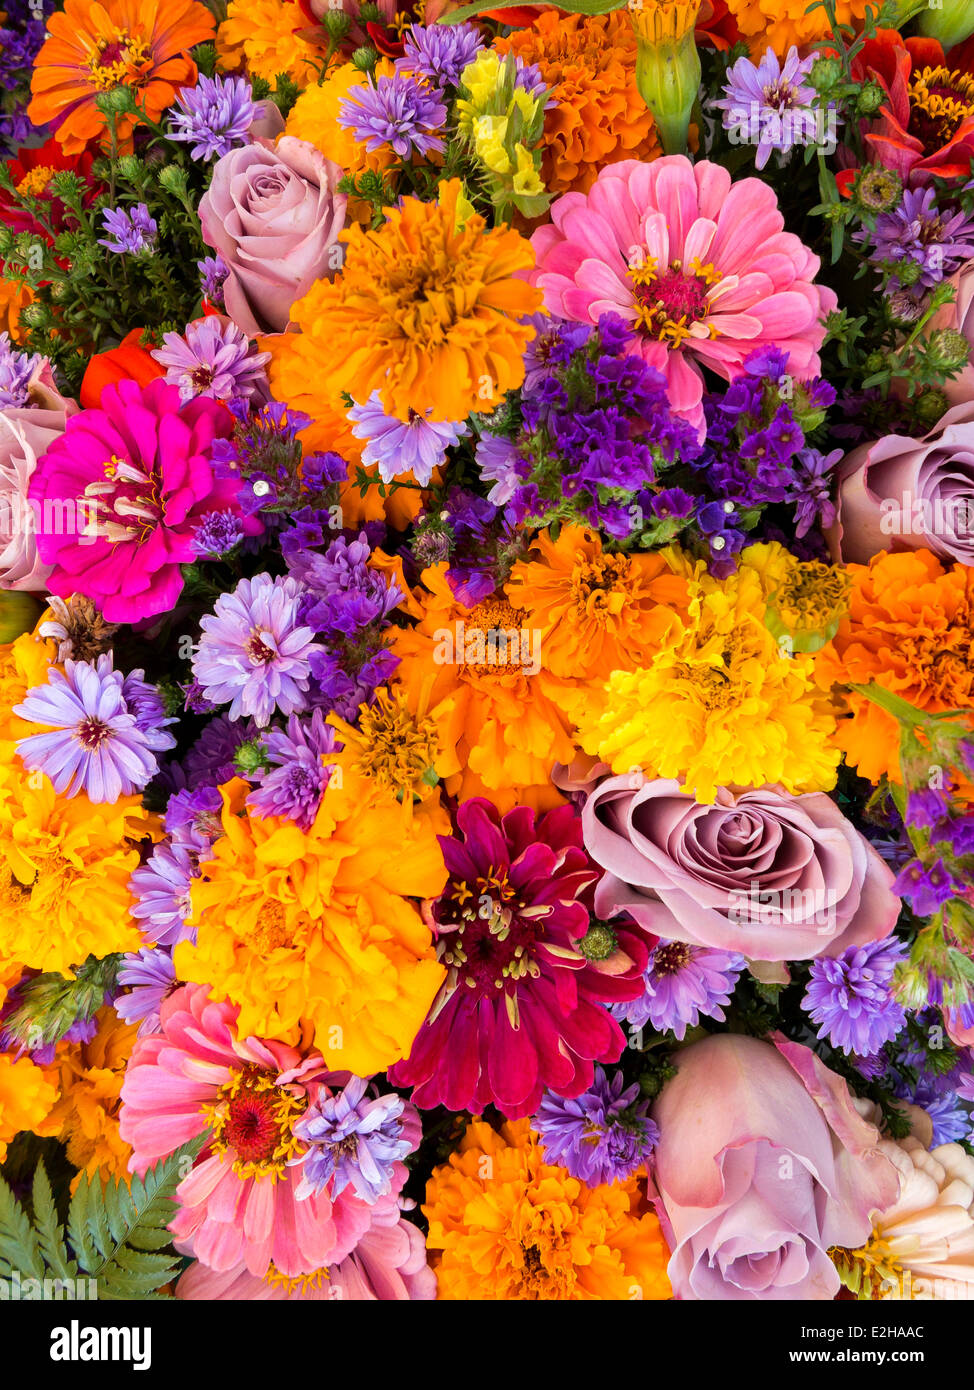 A colourful bouquet Stock Photo